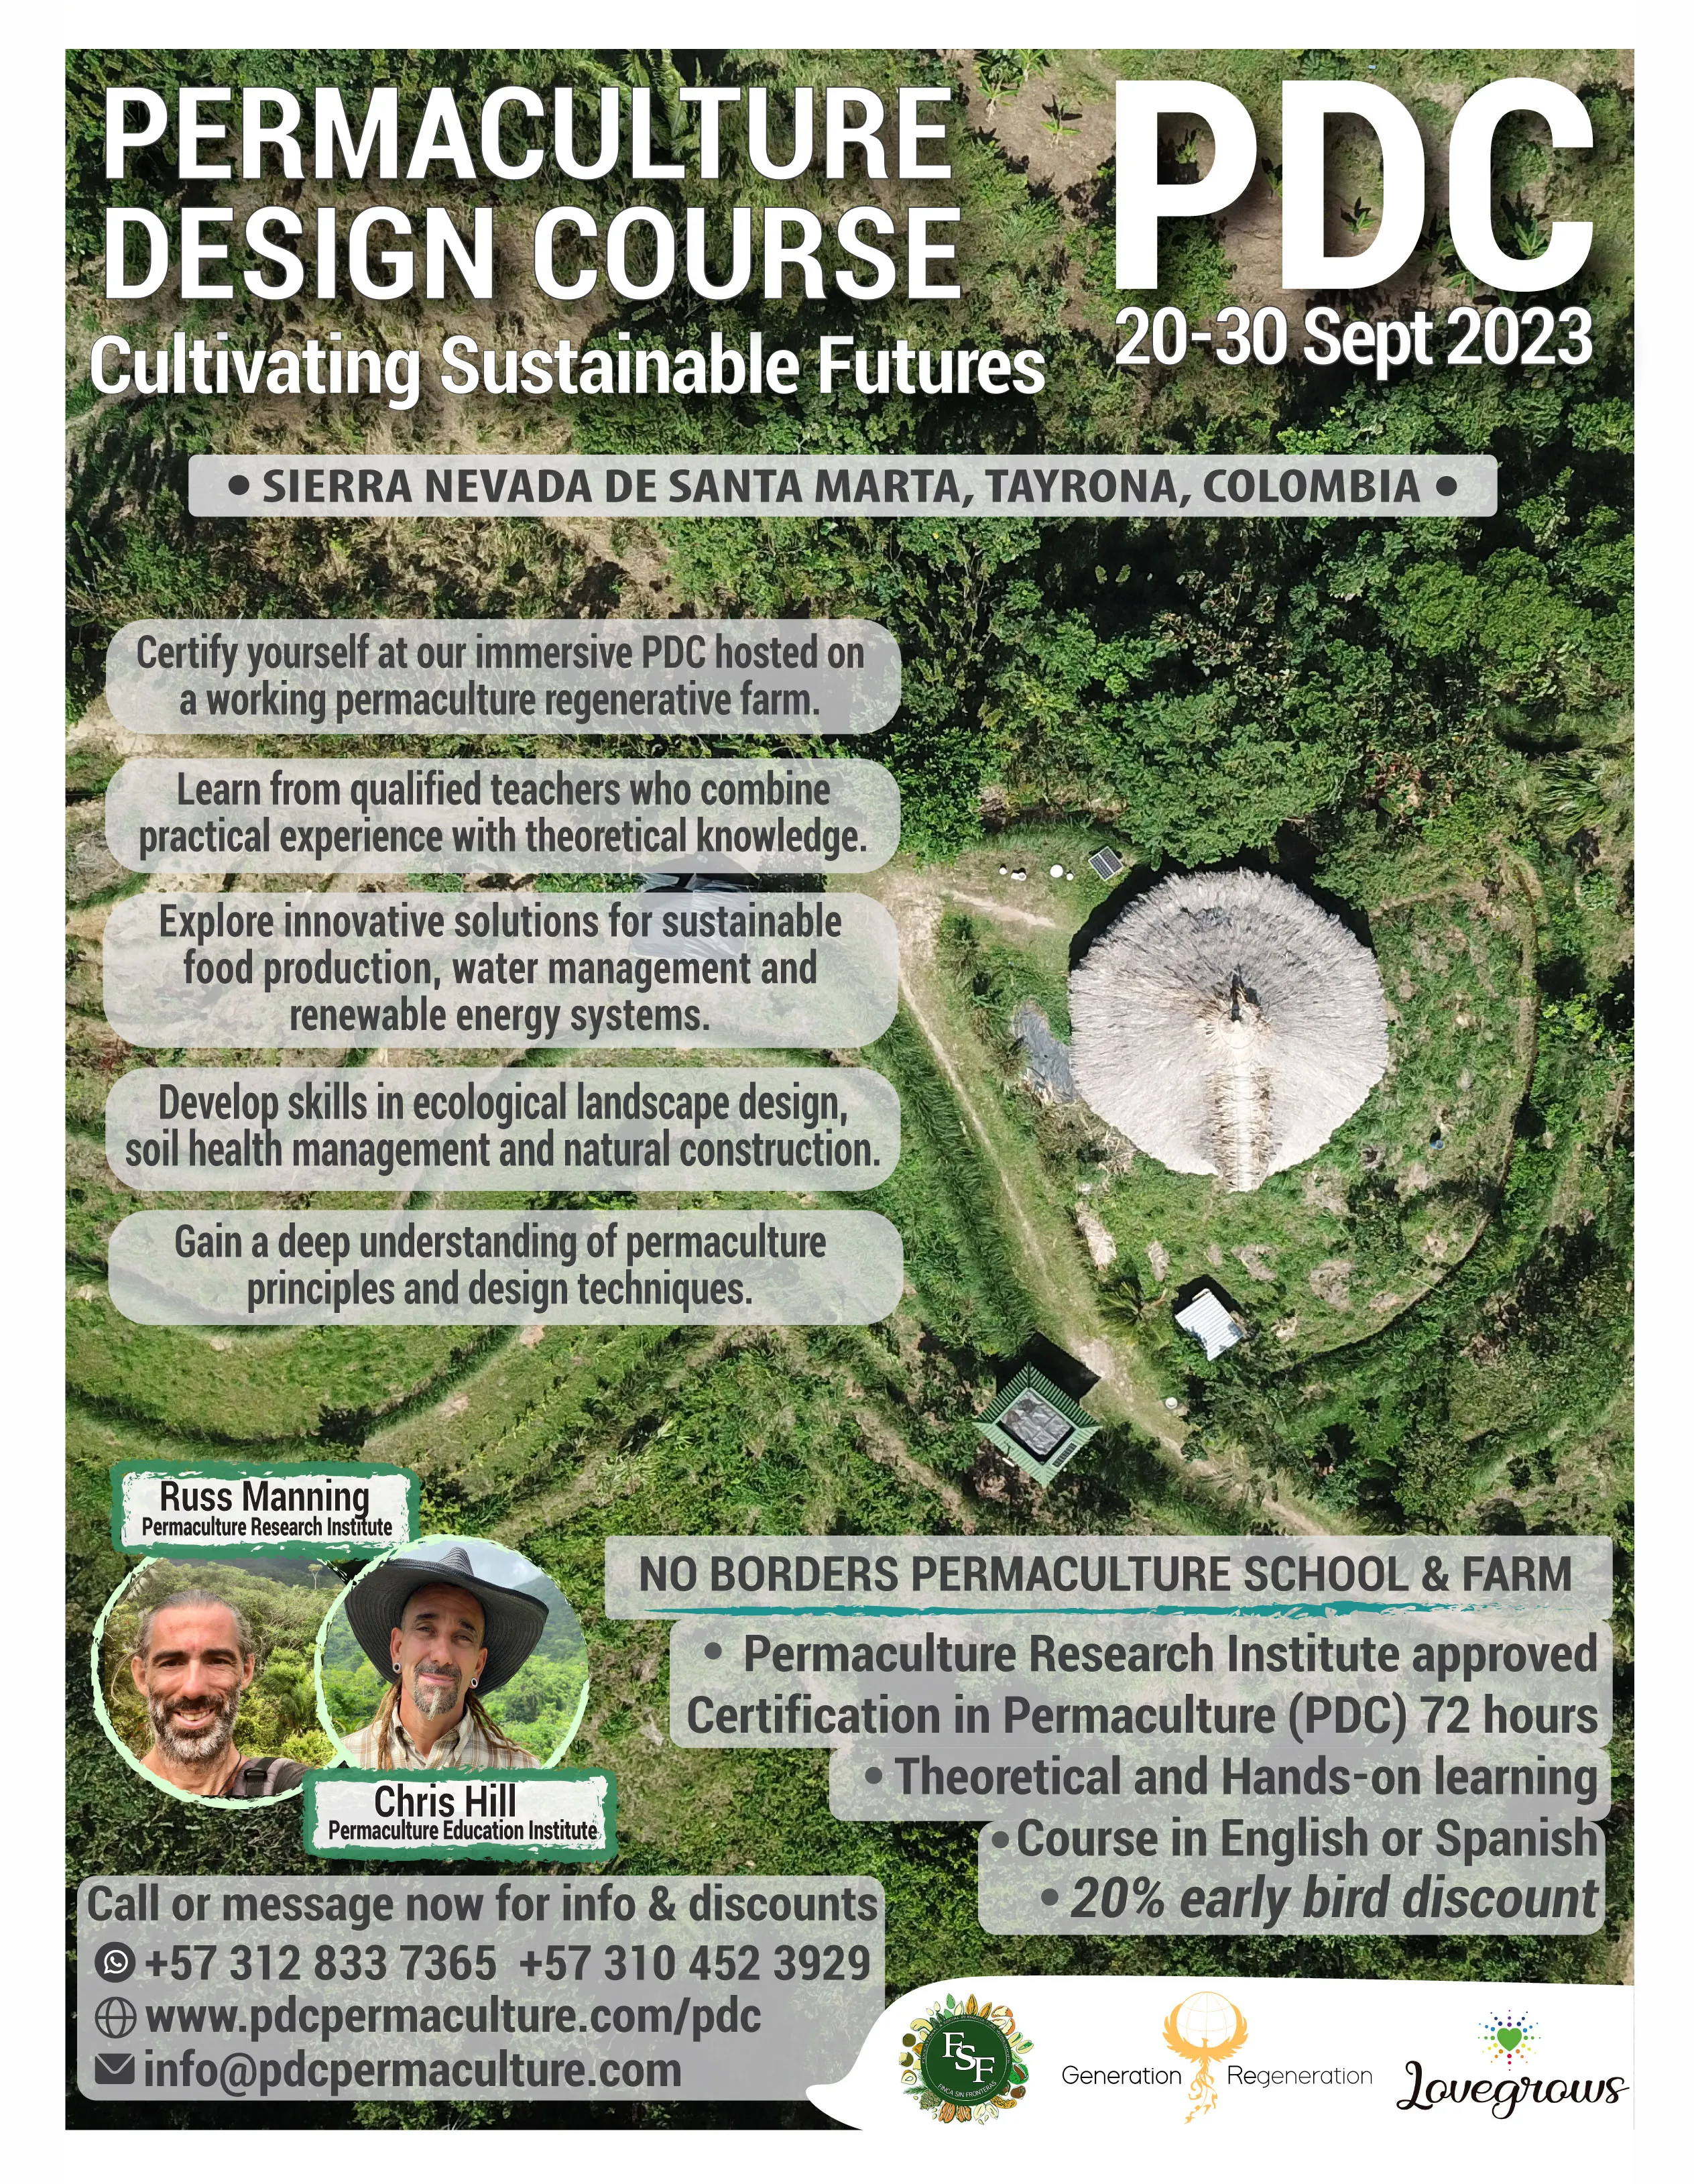 Permaculture design course PDC Colombia  2023